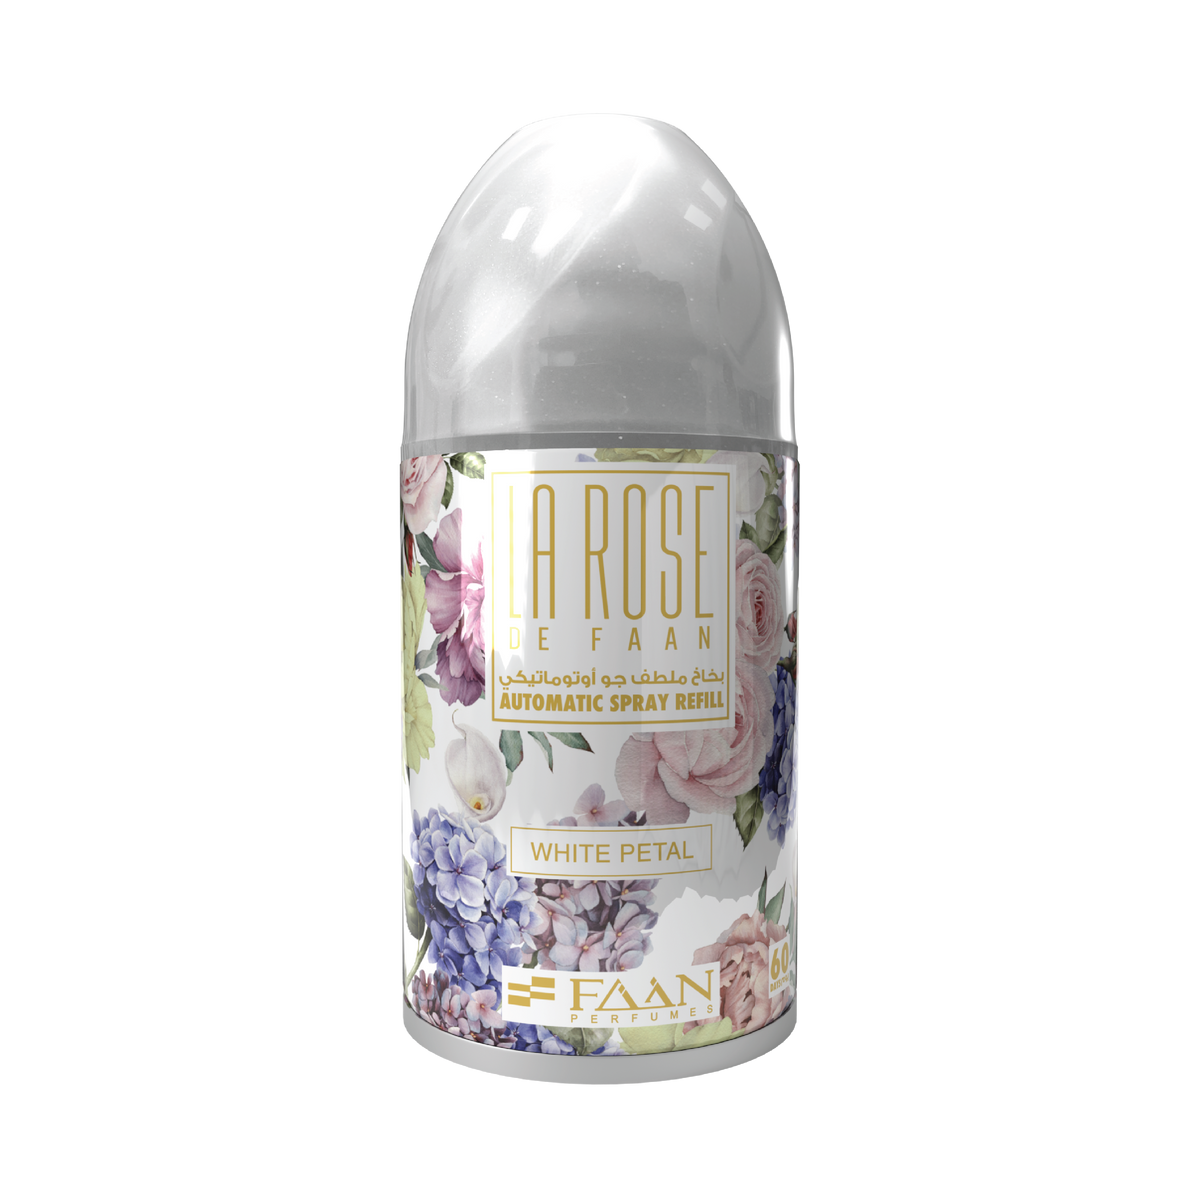 Experience Tranquility with La Rose White Petal Automatic Spray Refill 250ml